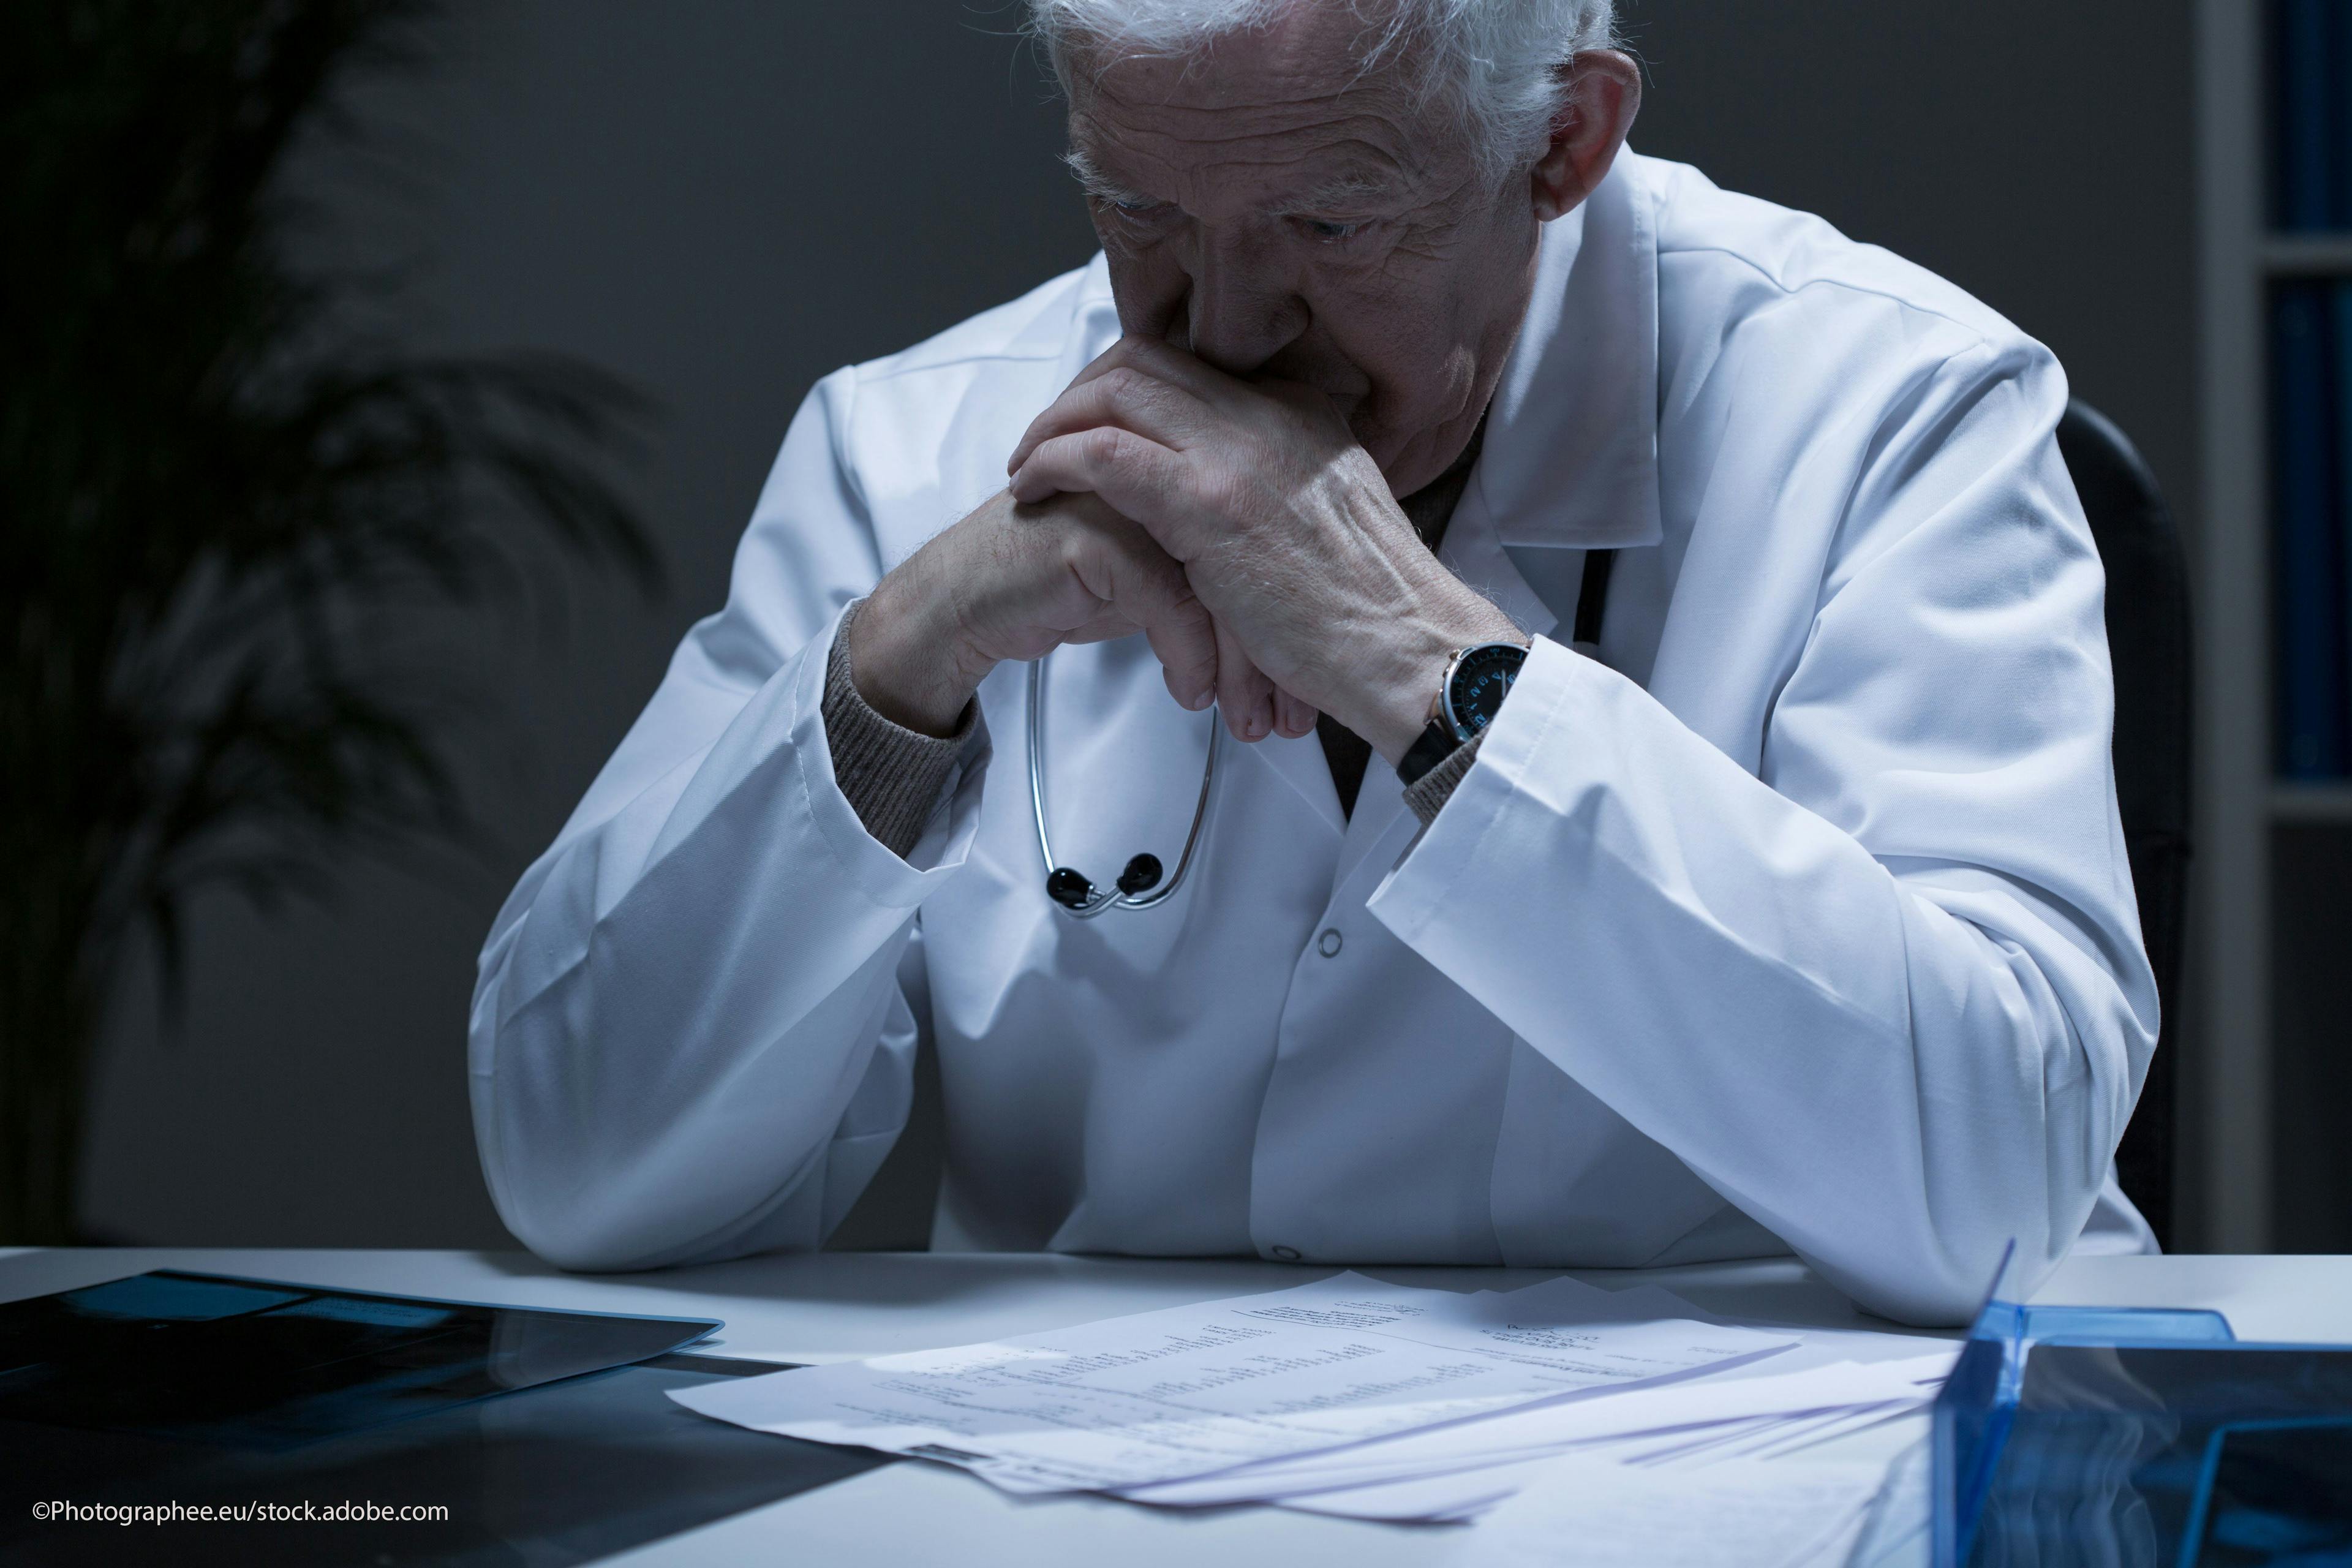 Beyond burnout: The real problem facing doctors is moral injury